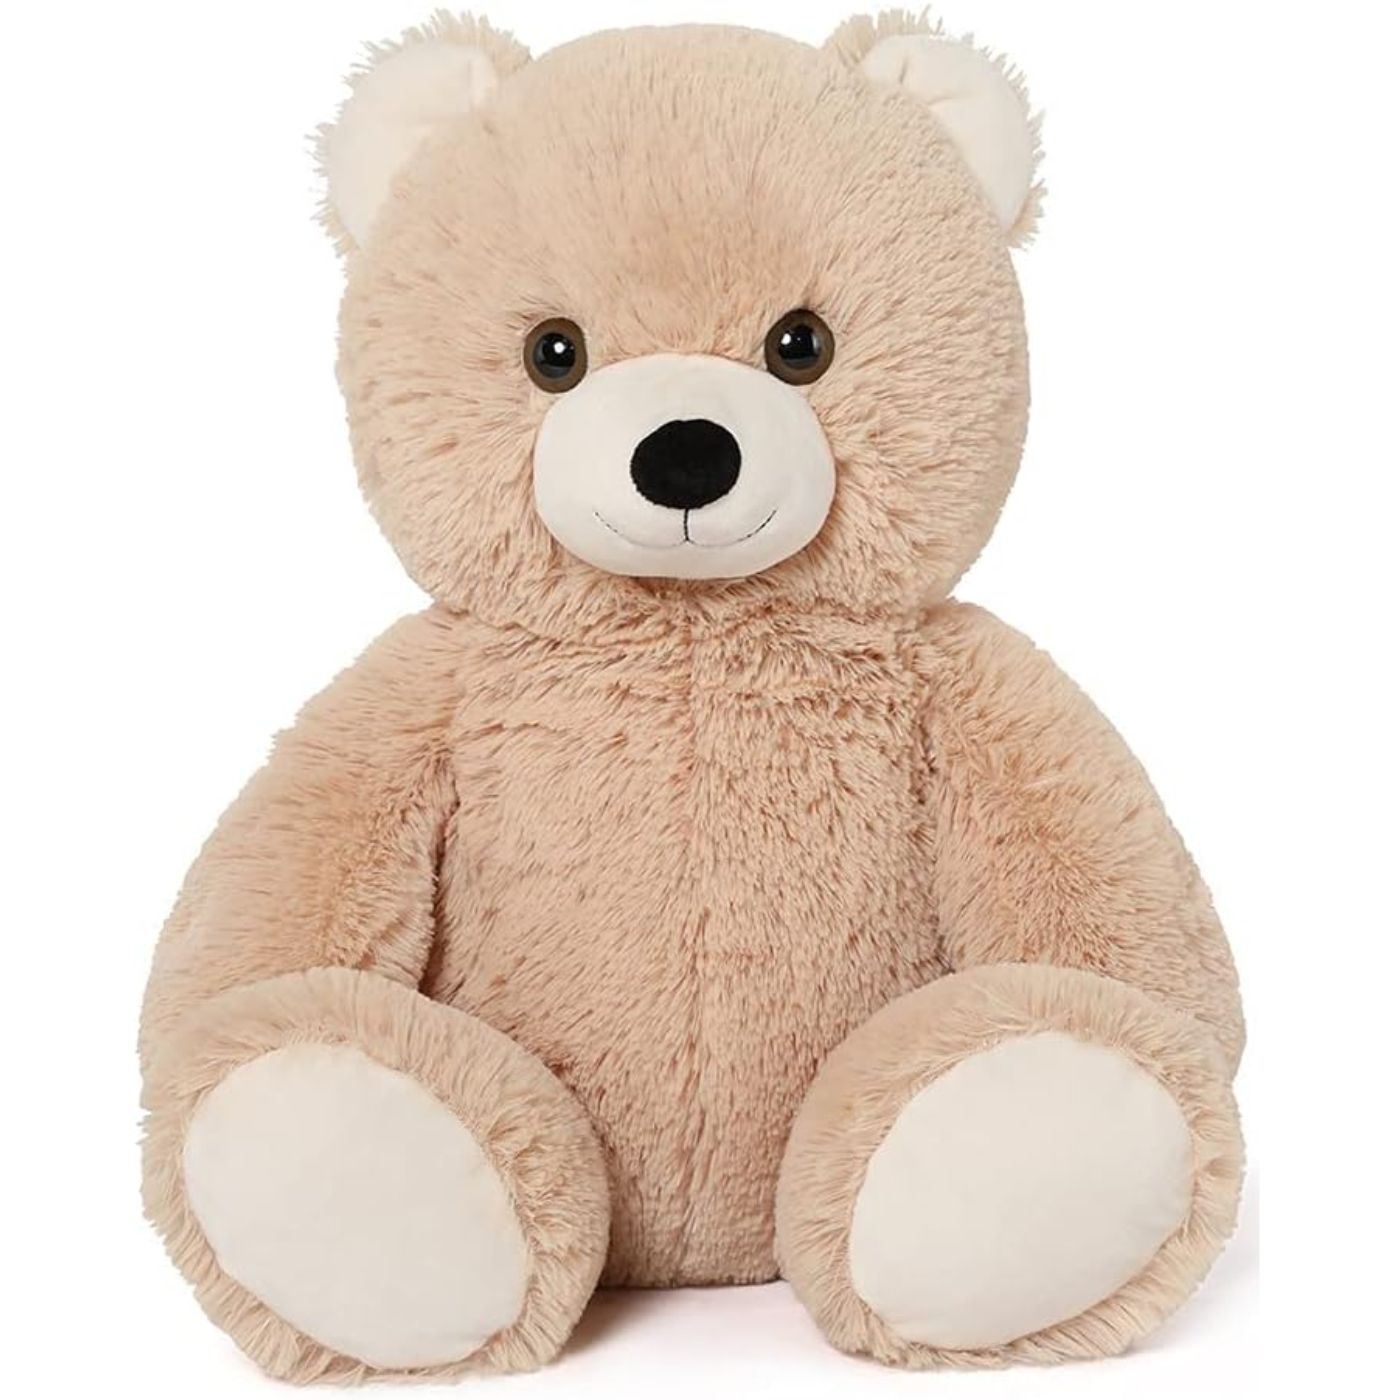 Teddy Bear Stuffed Toy, Light Brown, 18 Inches